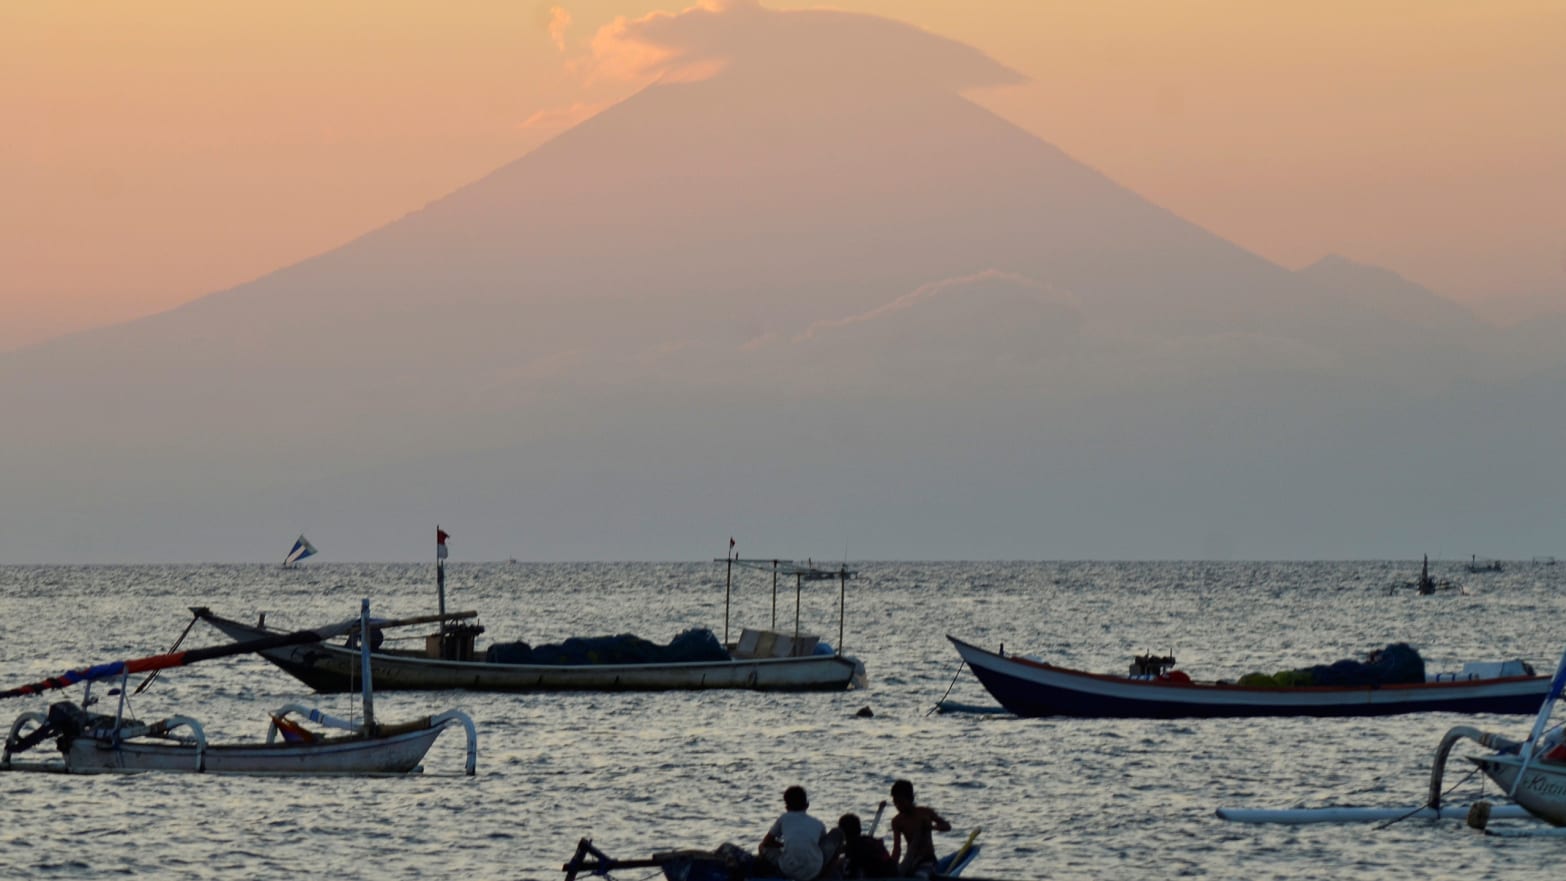 Tremors from Mount Agung have led Indonesian scientists to believe it may erupt for the first time in more than 50 years, forcing residents out amid heightened travel warnings.